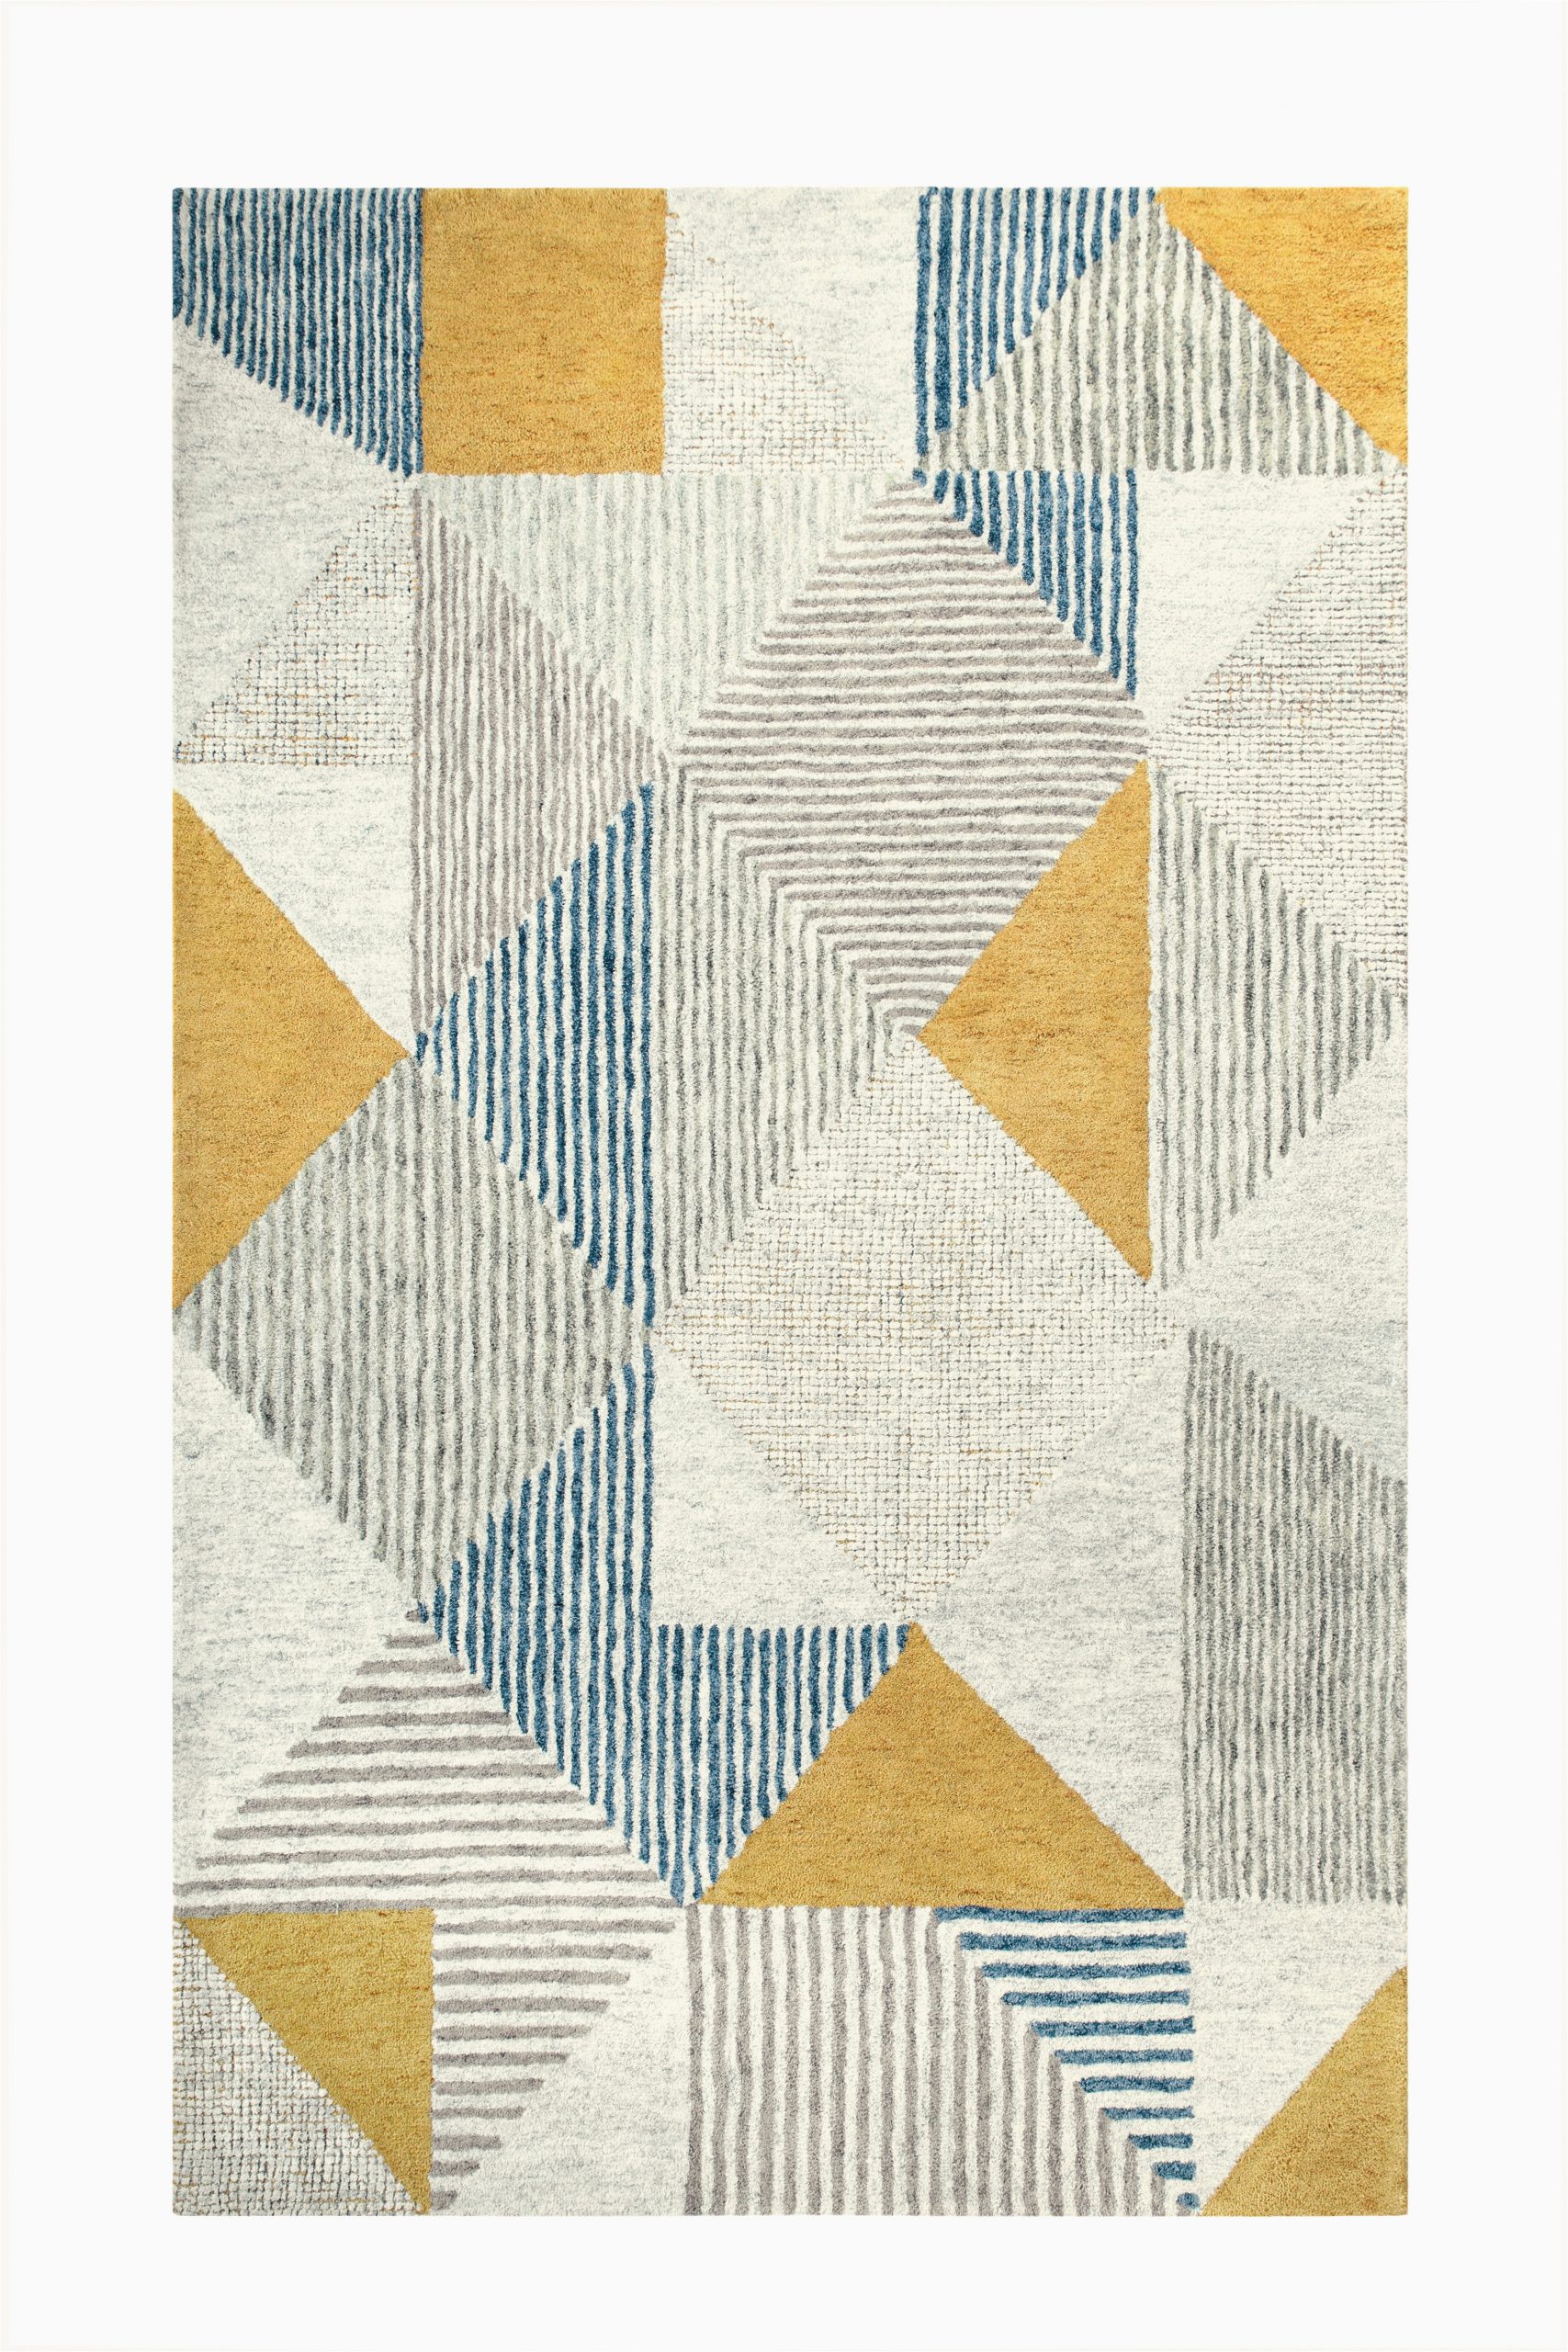 Area Rugs with Yellow Accents Griffin Geometric Handmade Tufted Wool Blue Gray Yellow area Rug